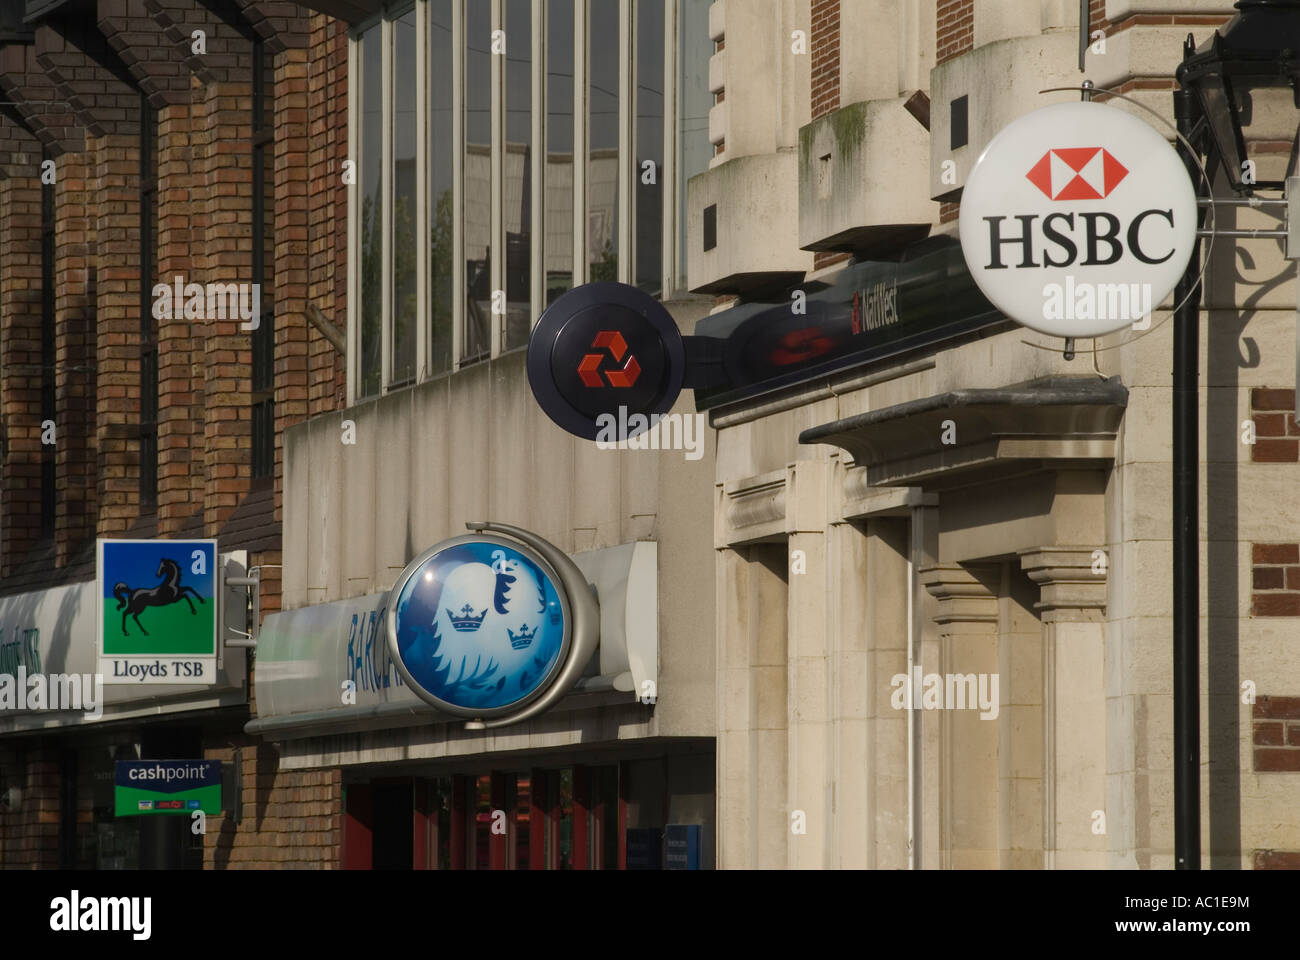 High Street Banks signs home counties UK 2007.  2000s when there were still banks in a local High Street. HOMER SYKES Stock Photo